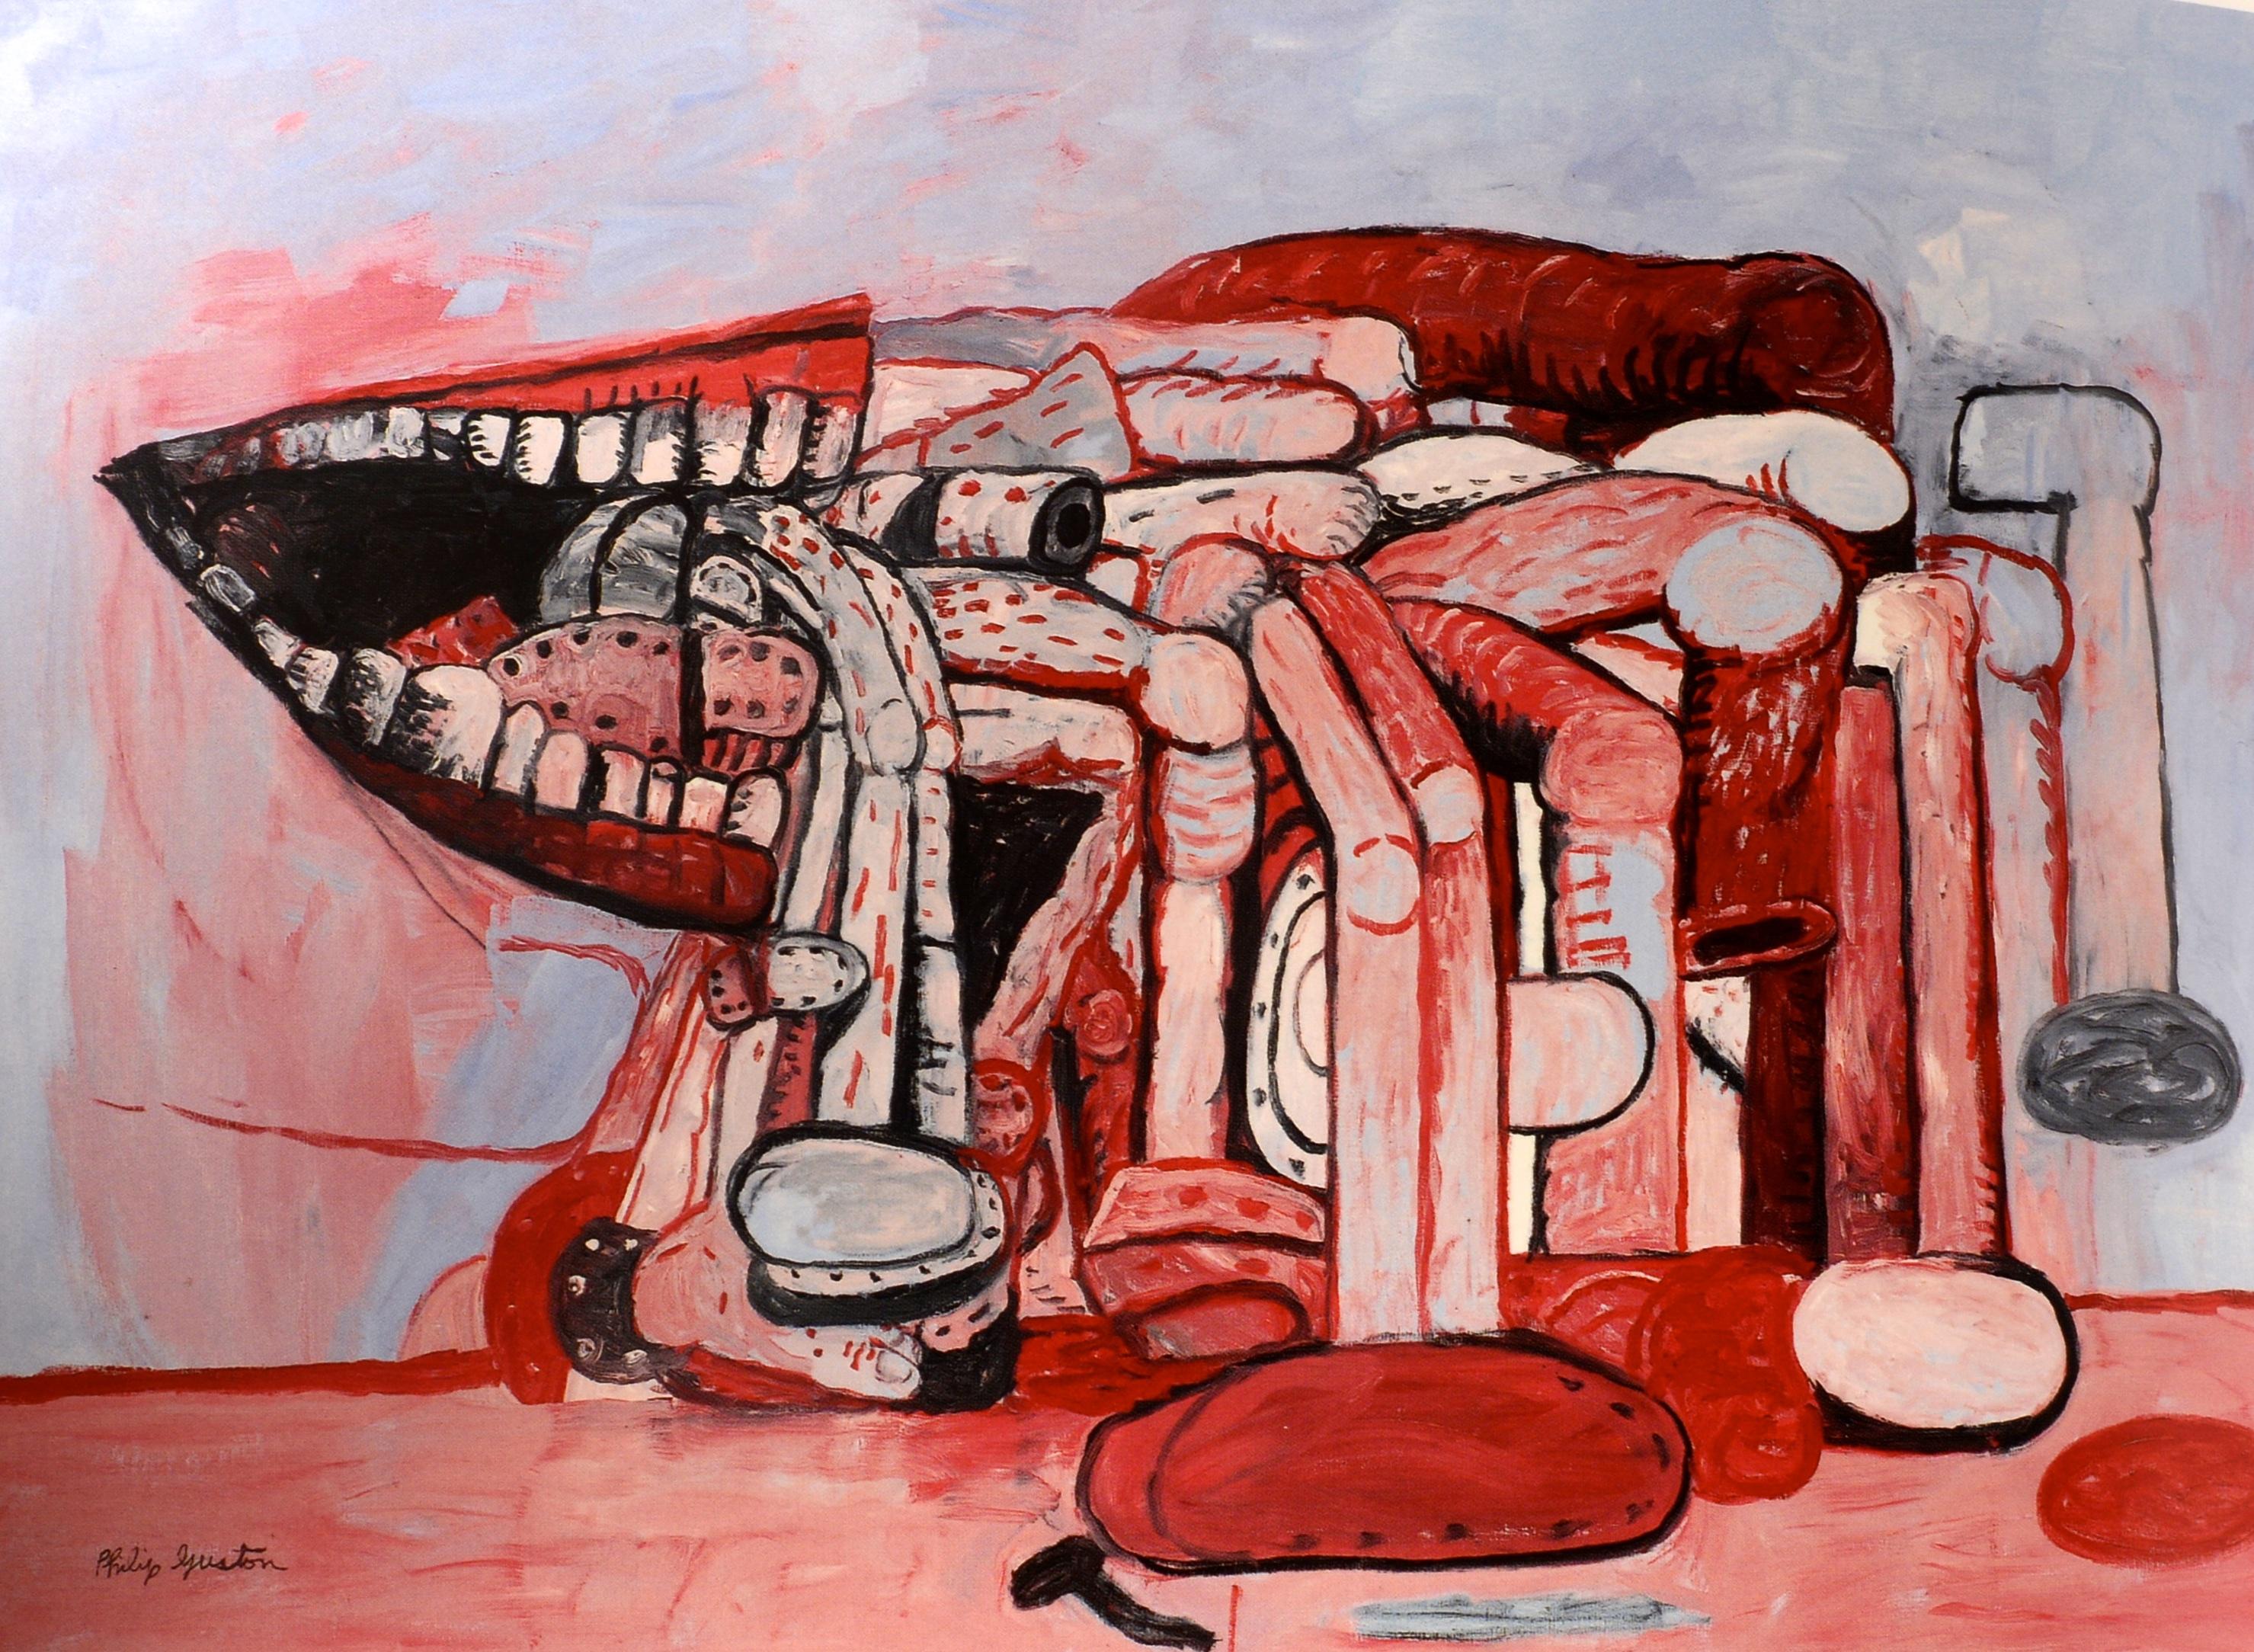 jacque guston